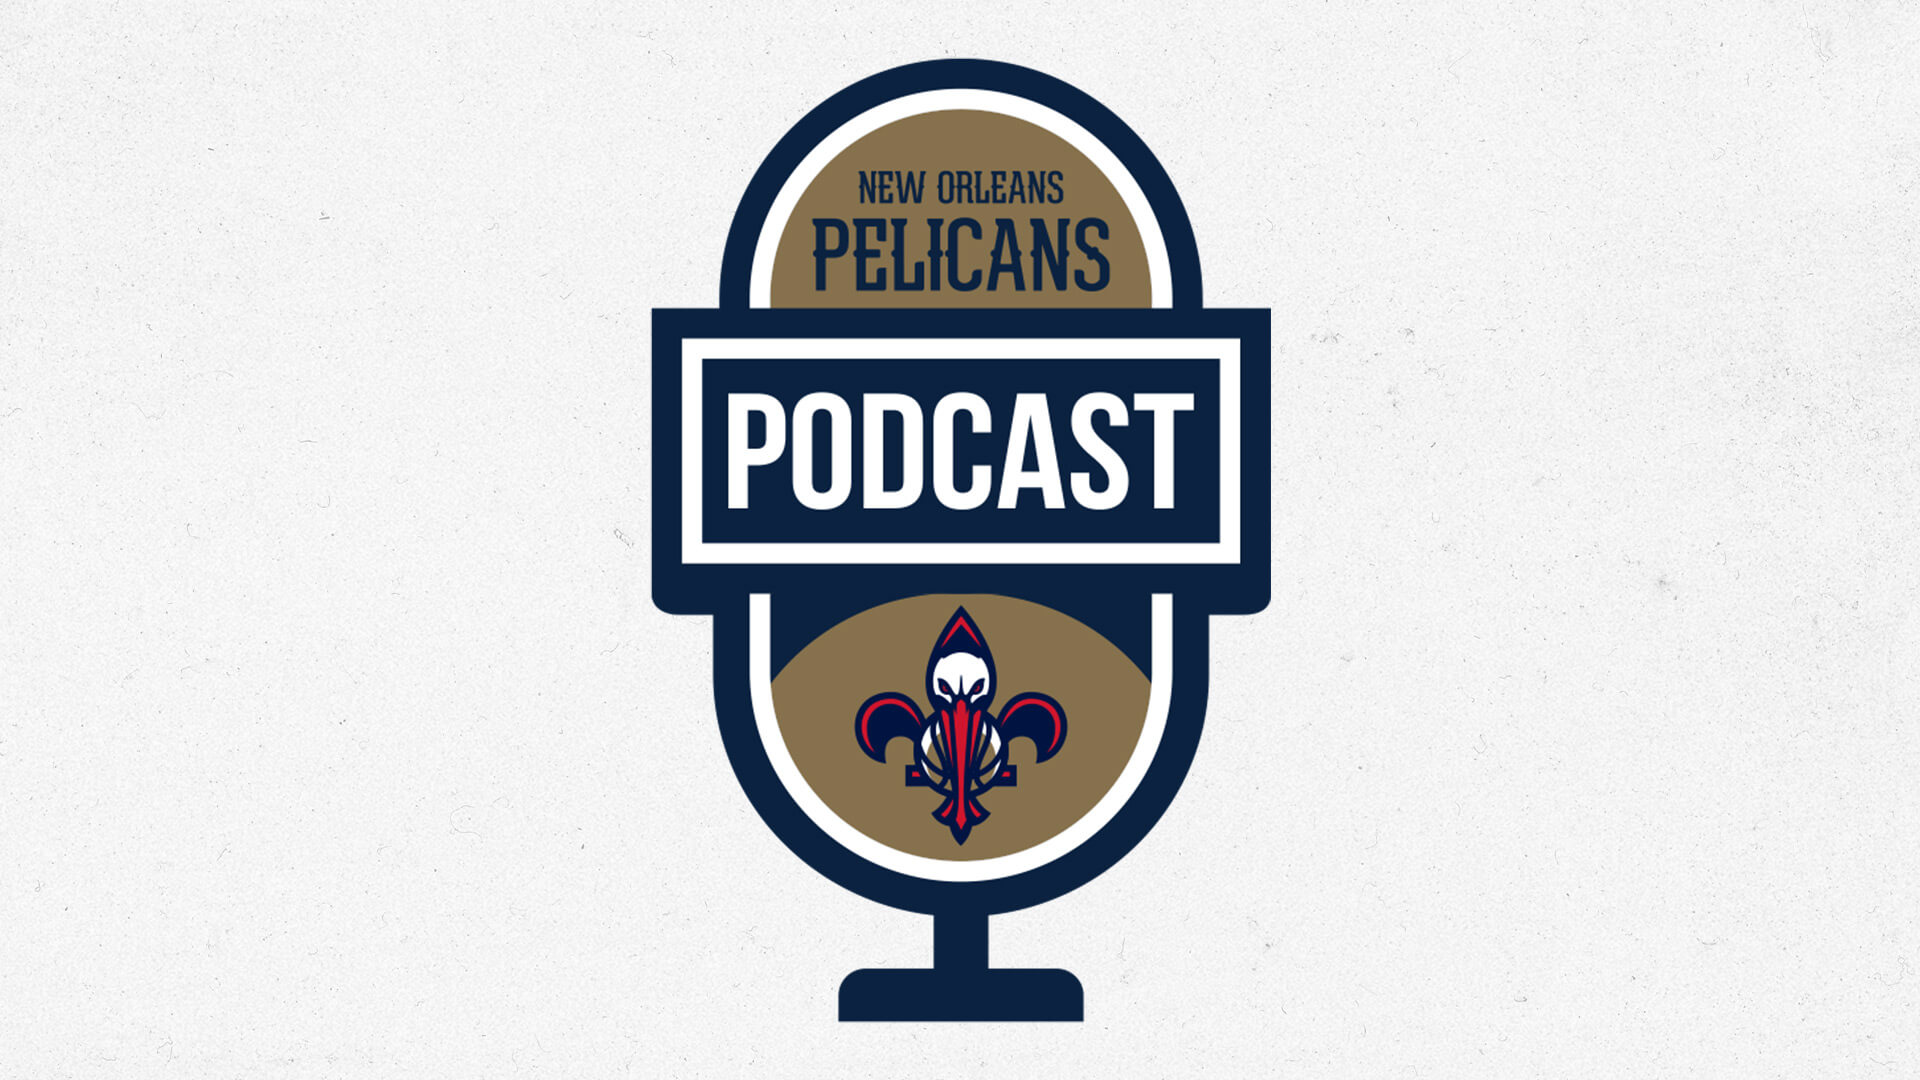 Pelicans in Top 6 of NBA Standings, 6-Game Homestand | Pelicans Podcast